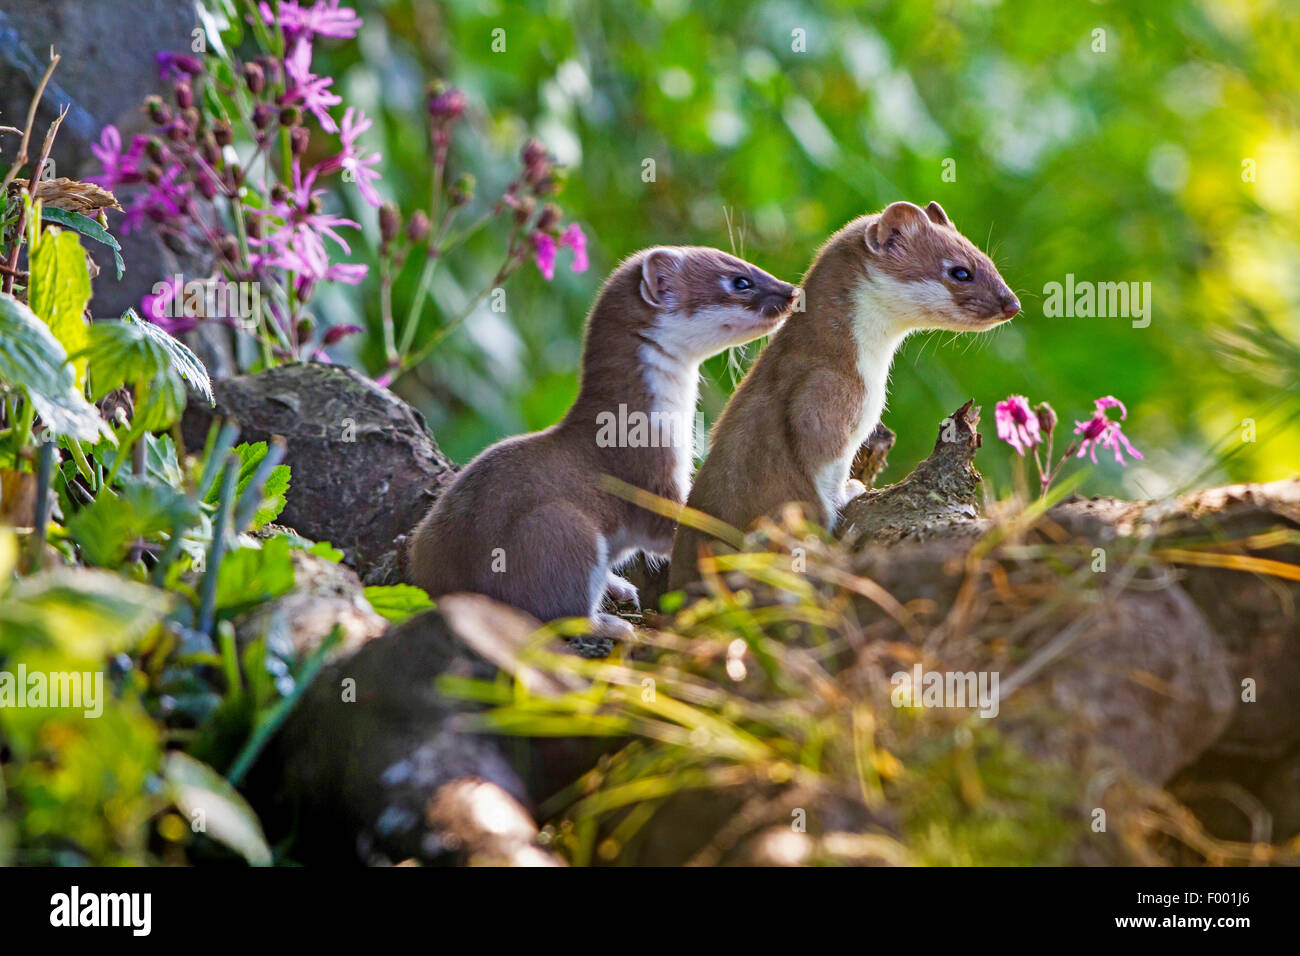 Ermine, Stoat, Short-tailed weasel (Mustela erminea), two ermines play on logs, Switzerland, Sankt Gallen, Kaan Stock Photo